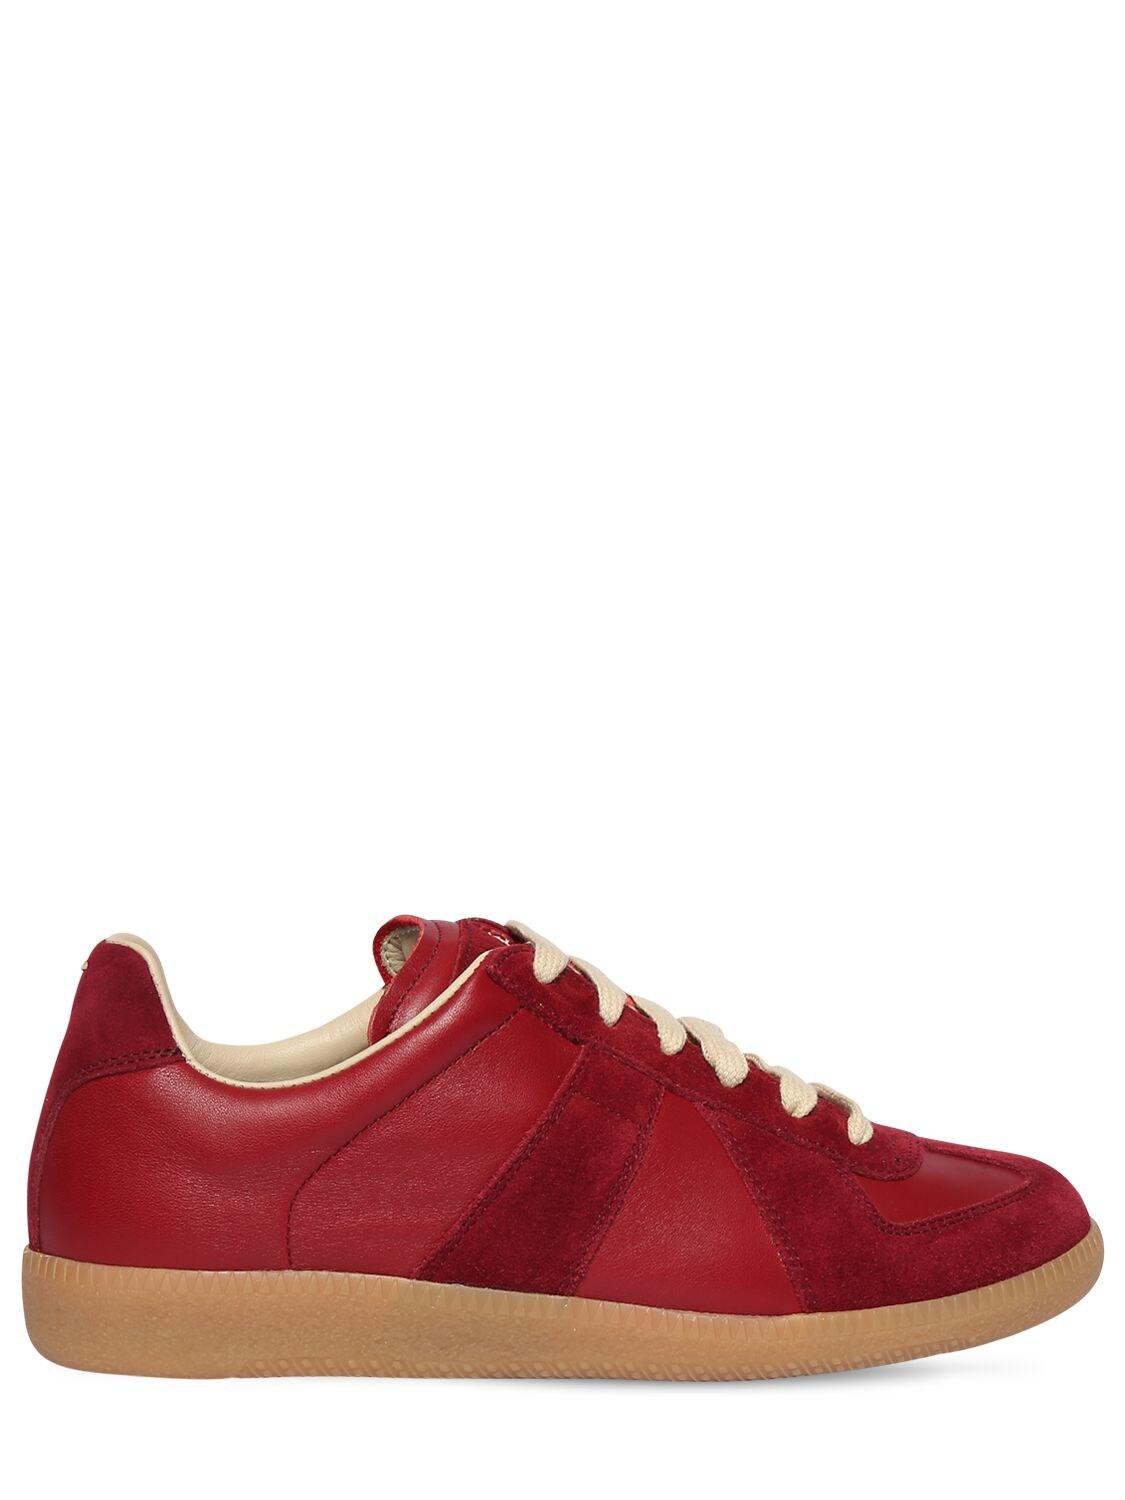 Maison Margiela 20mm Replica Leather & Suede Sneakers in Dark Red (Red ...